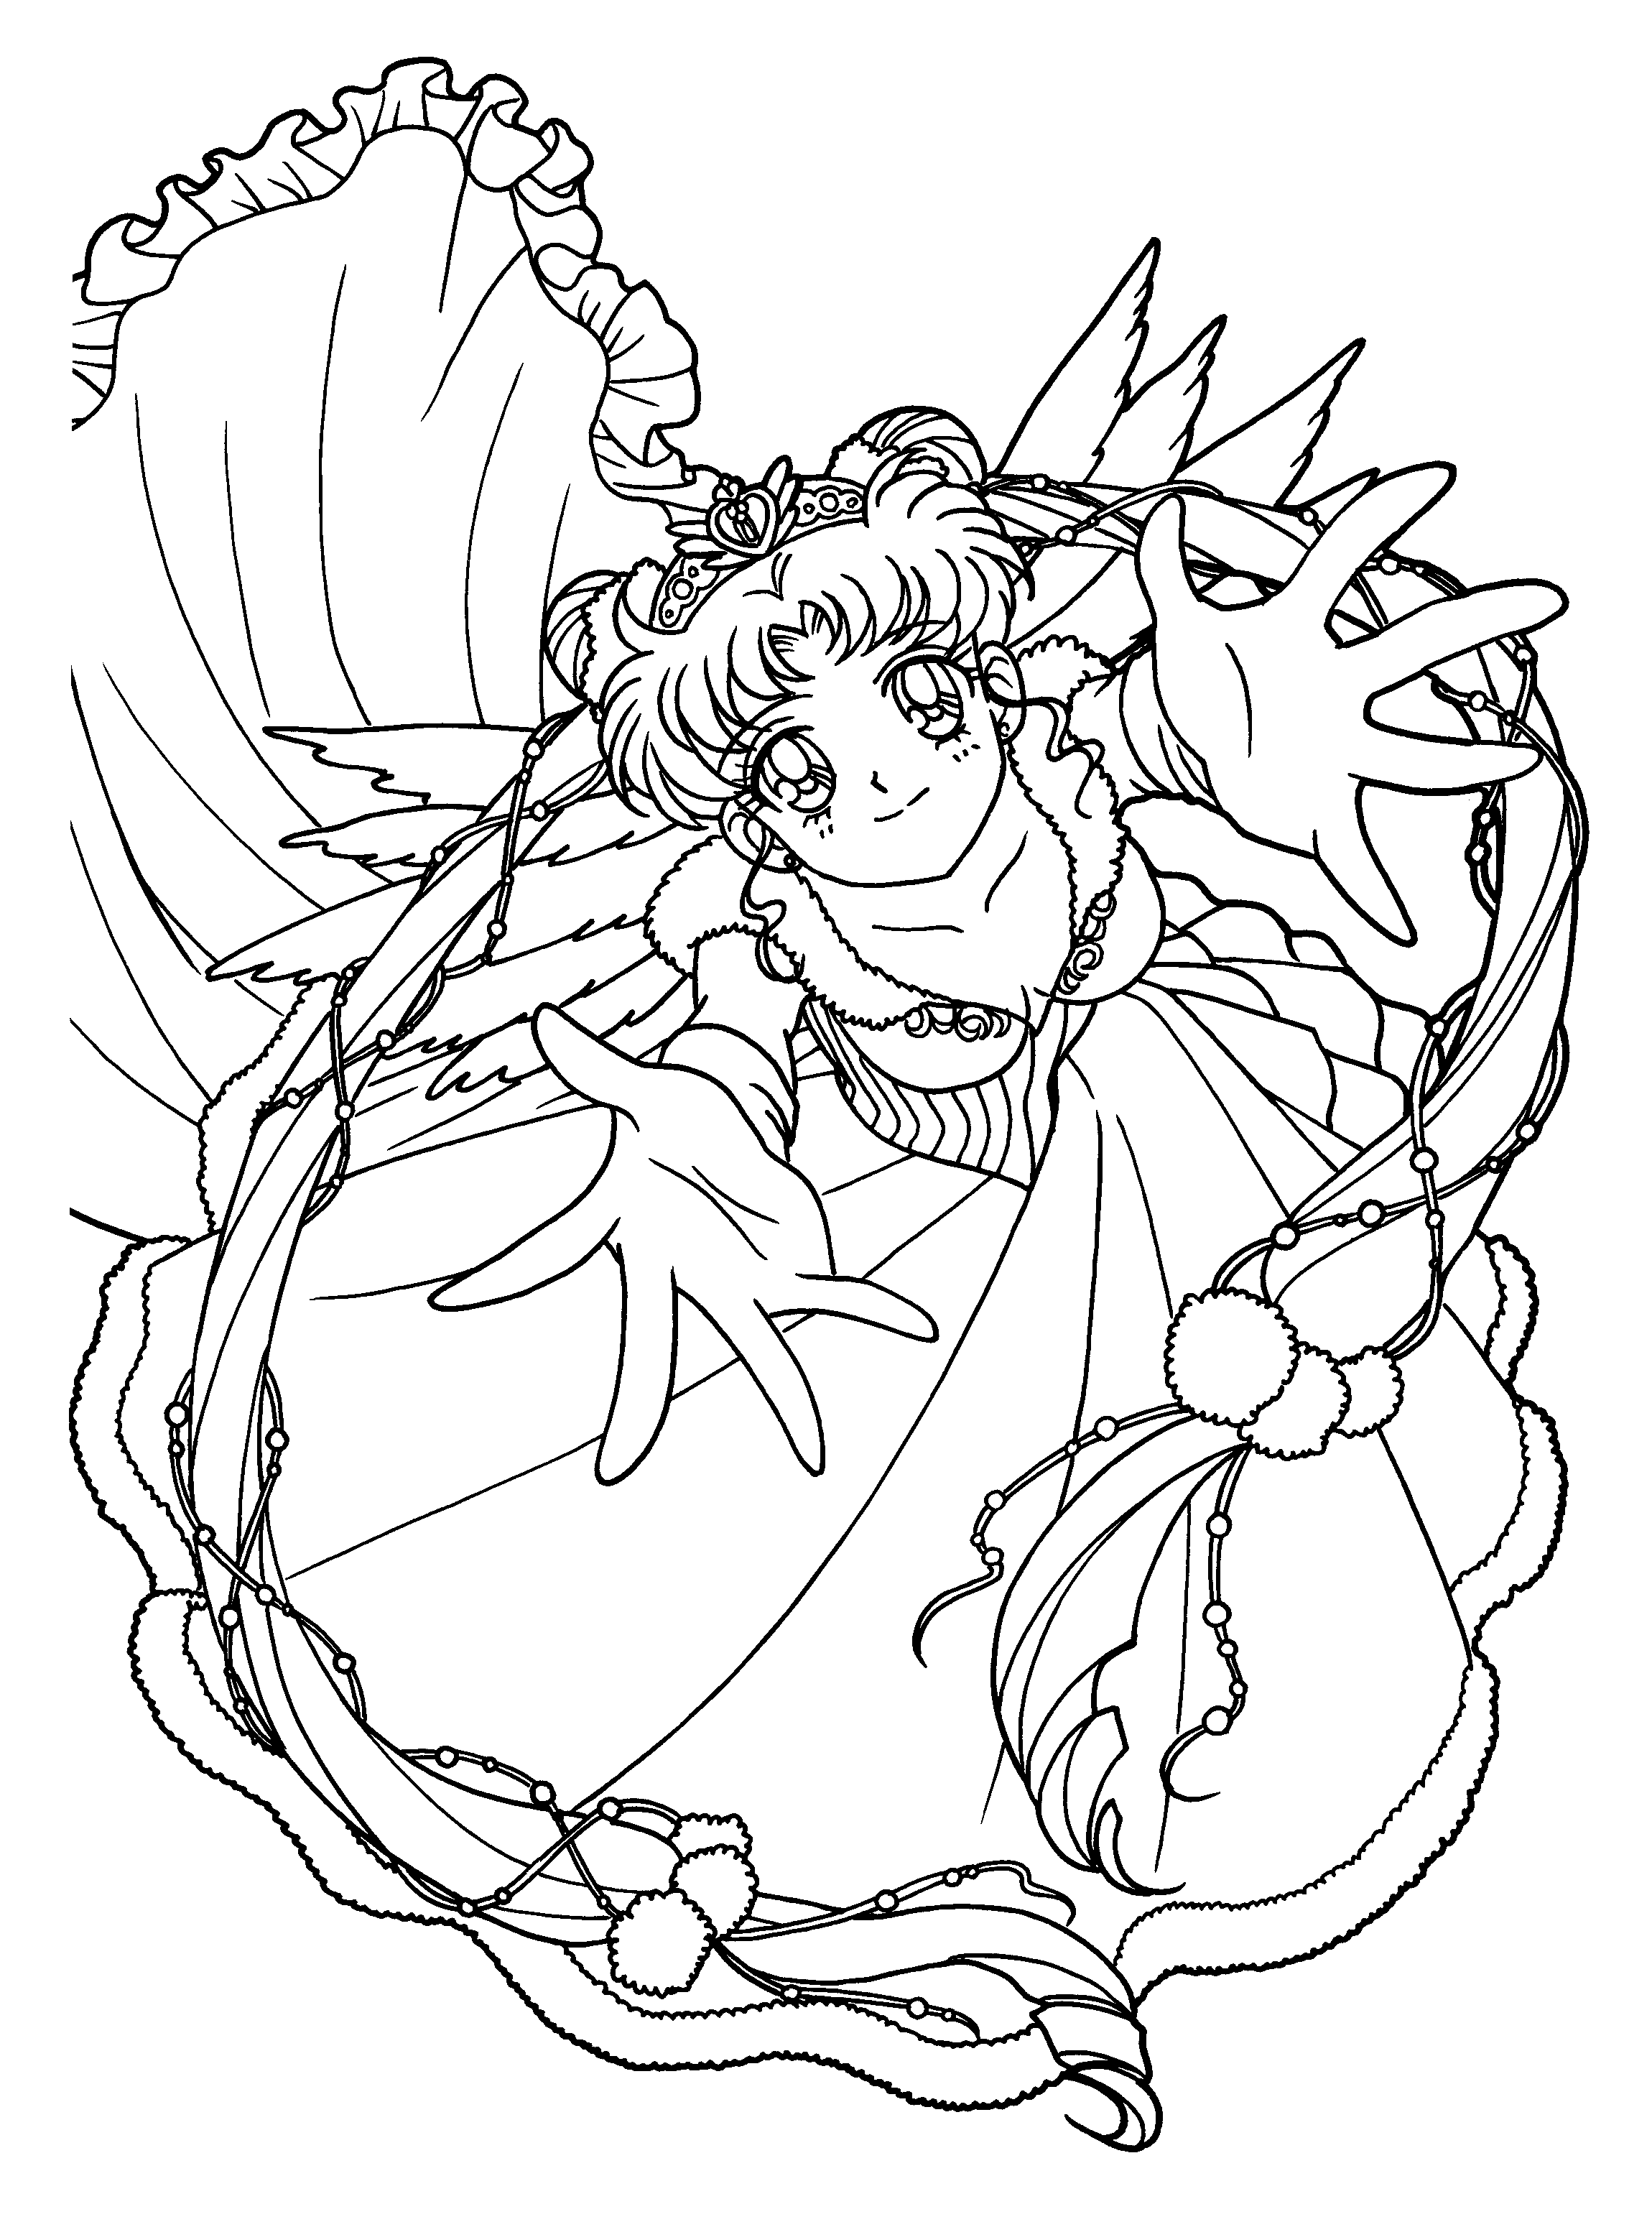 sailor moon coloring pages free - photo #29